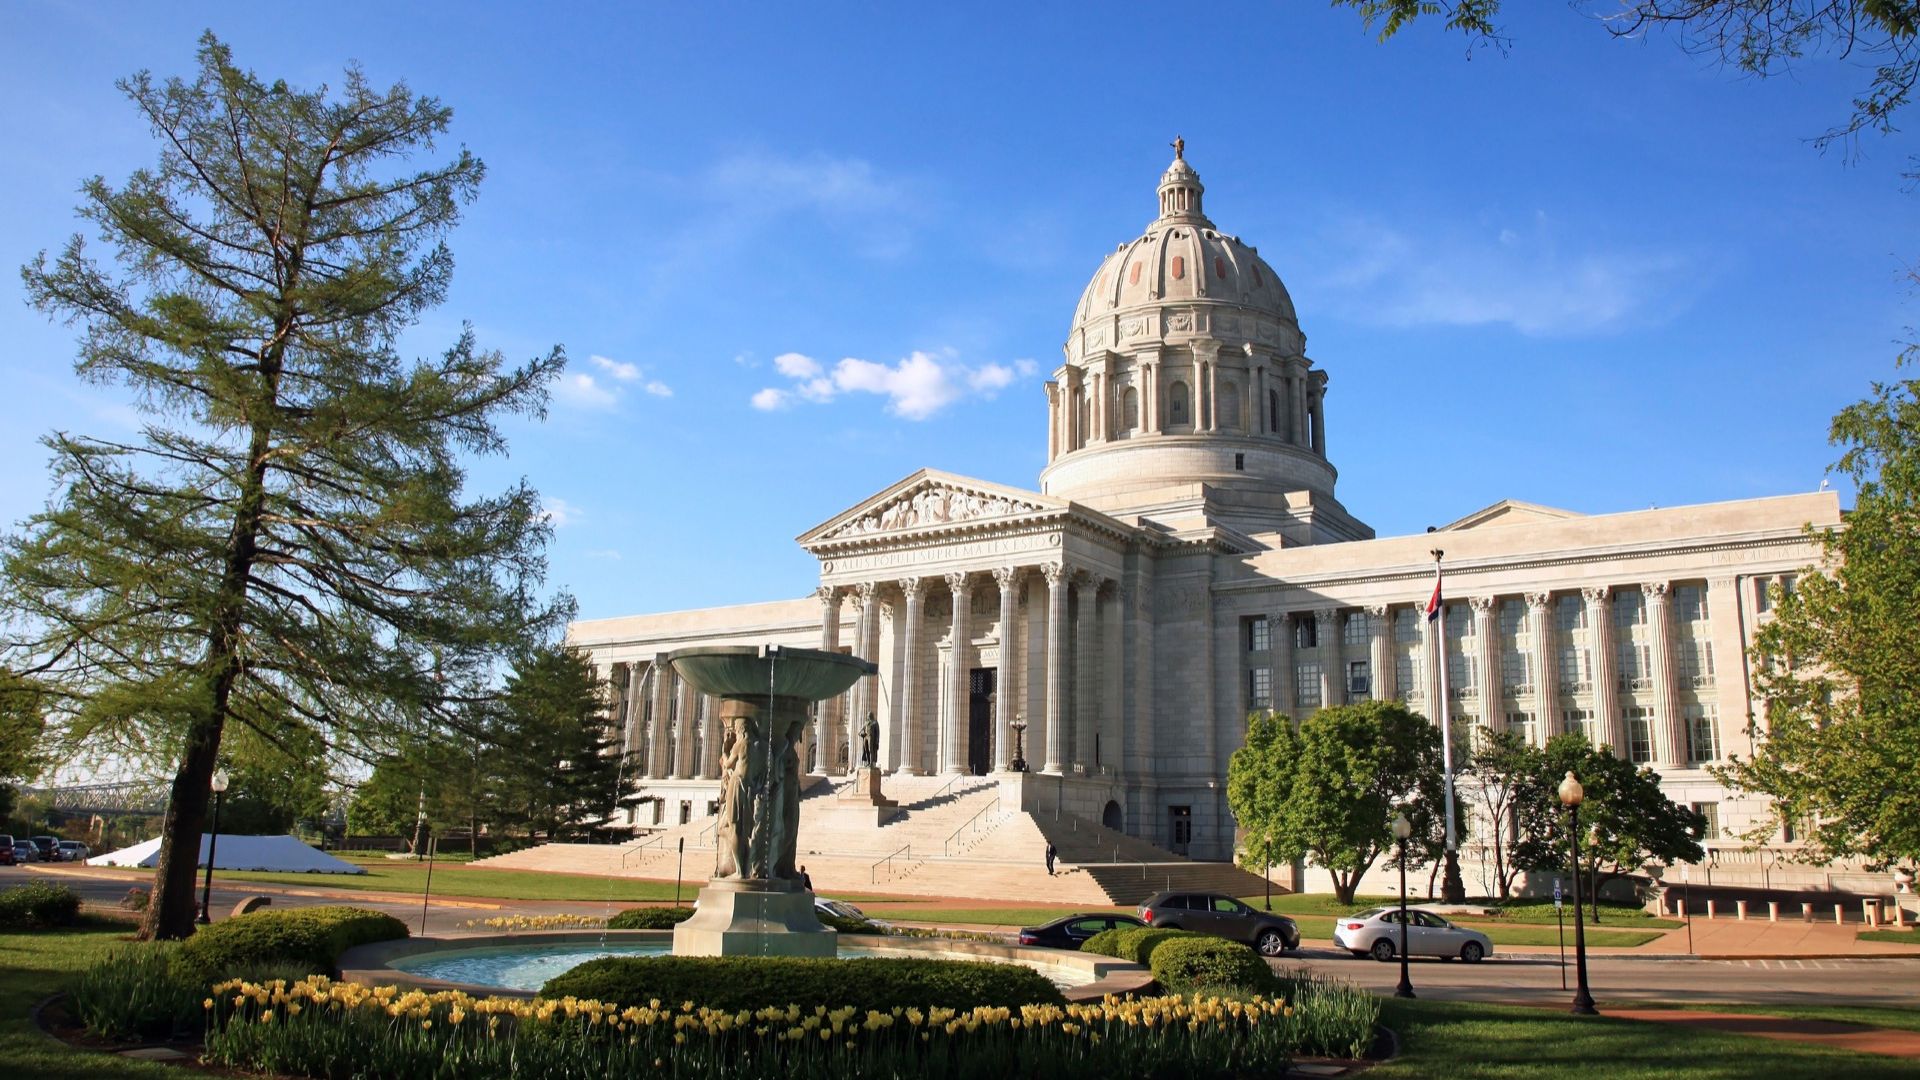 The Missouri state capitol building